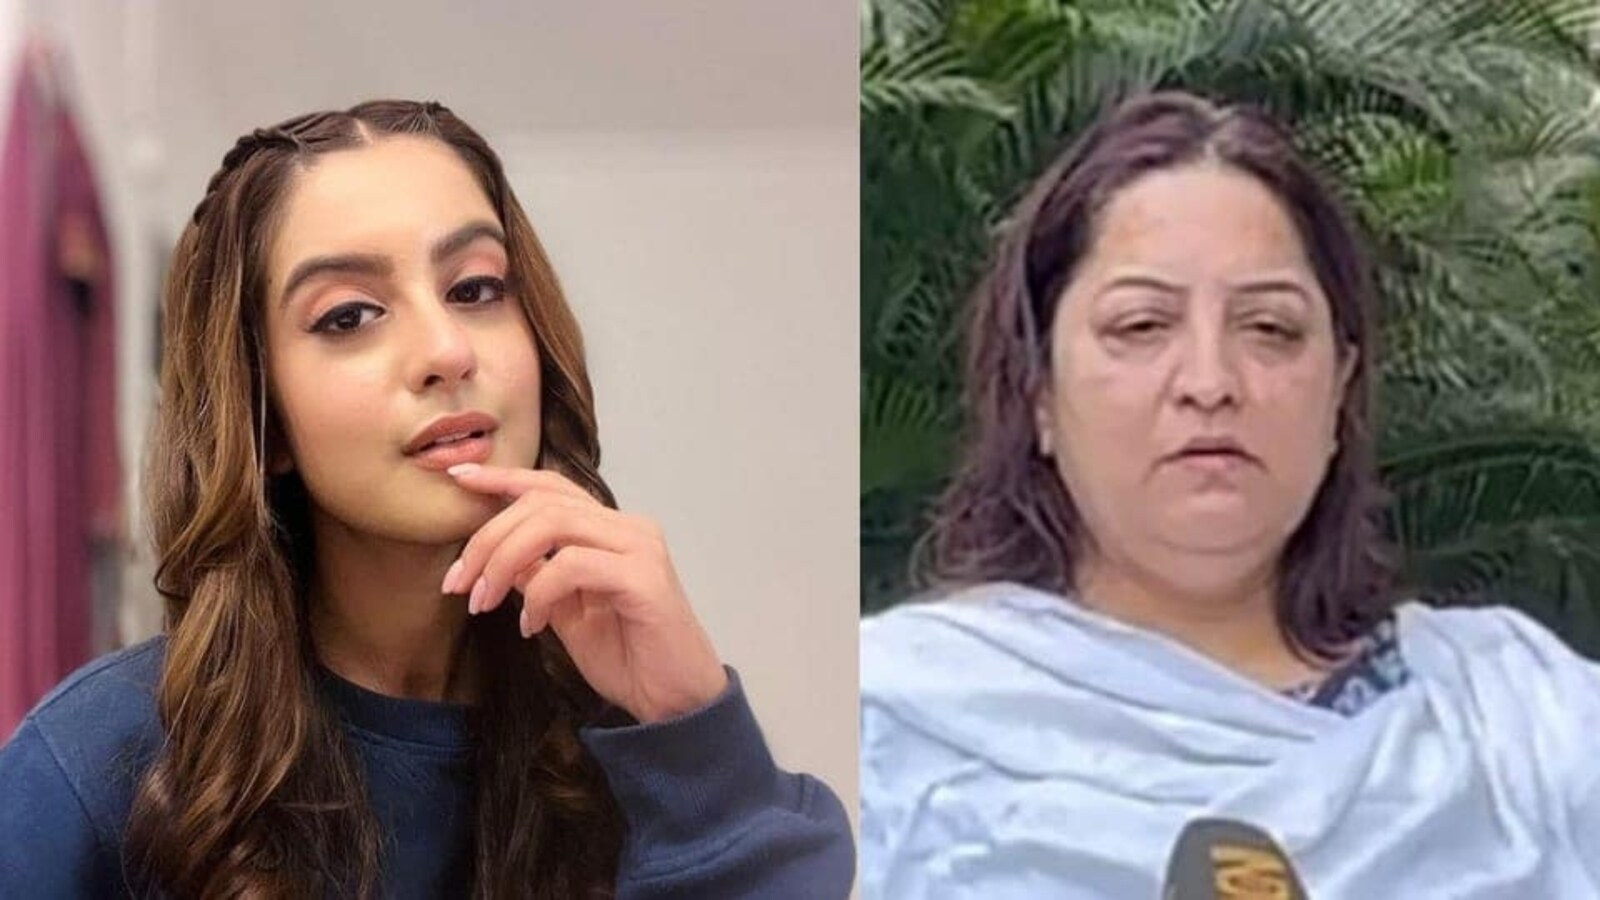 Tunisha Sharma’s mom accuses Sheezan Khan of taking her to hospital ‘far away’: She was breathing, could have been saved